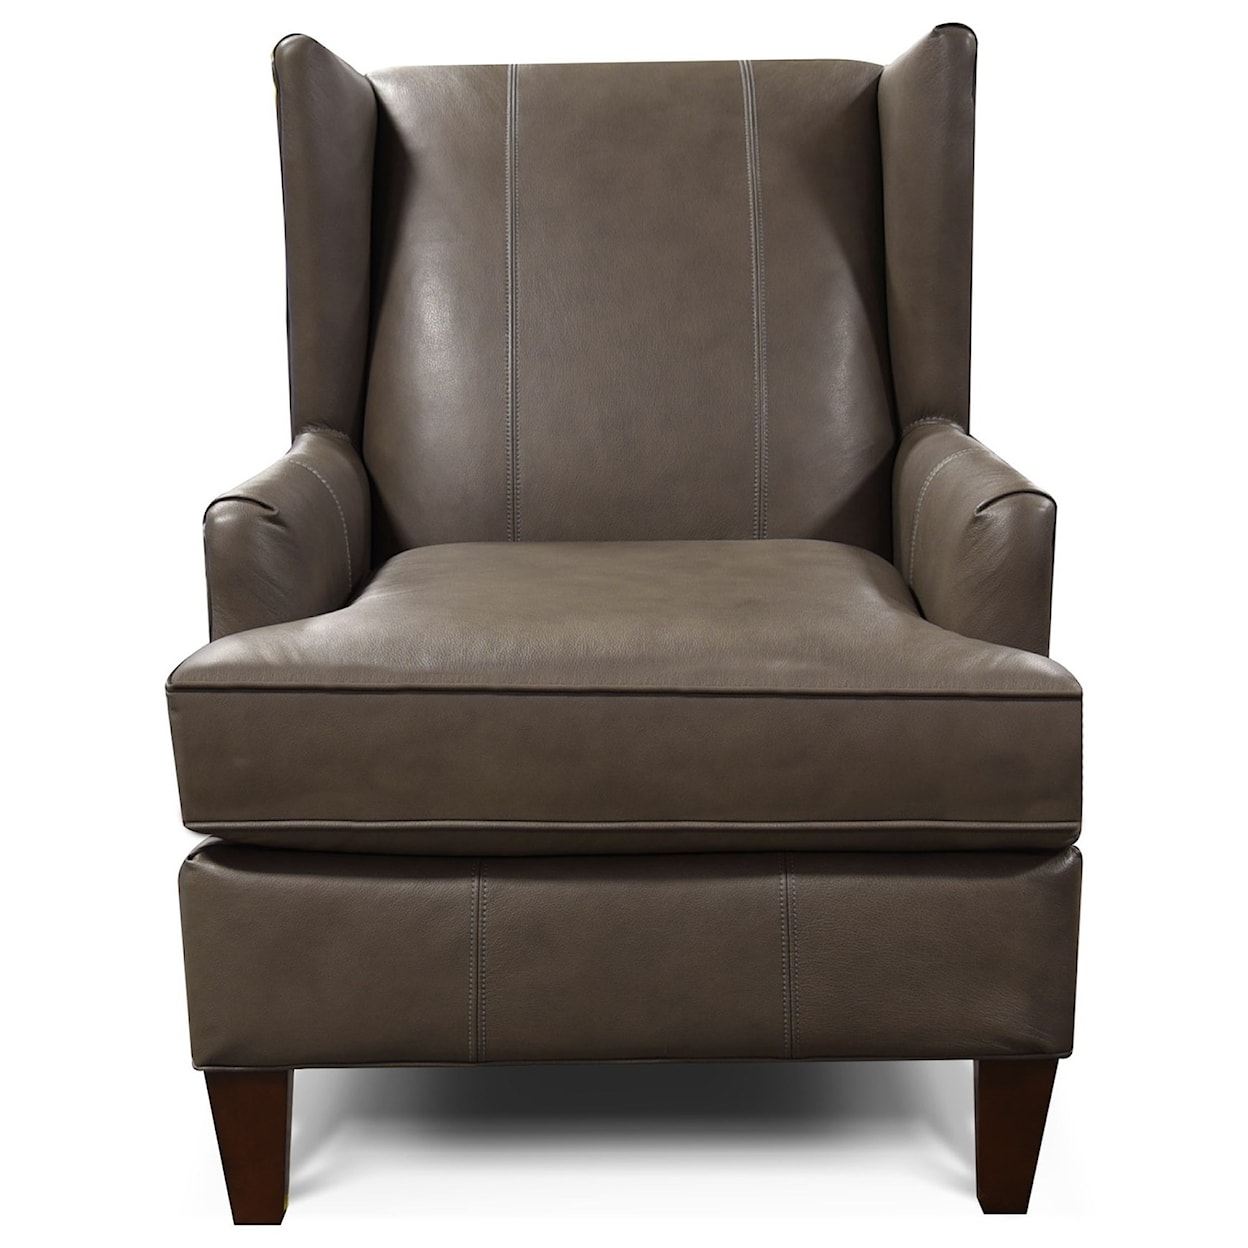 England 470/490/N Series Upholstered Wing Chair